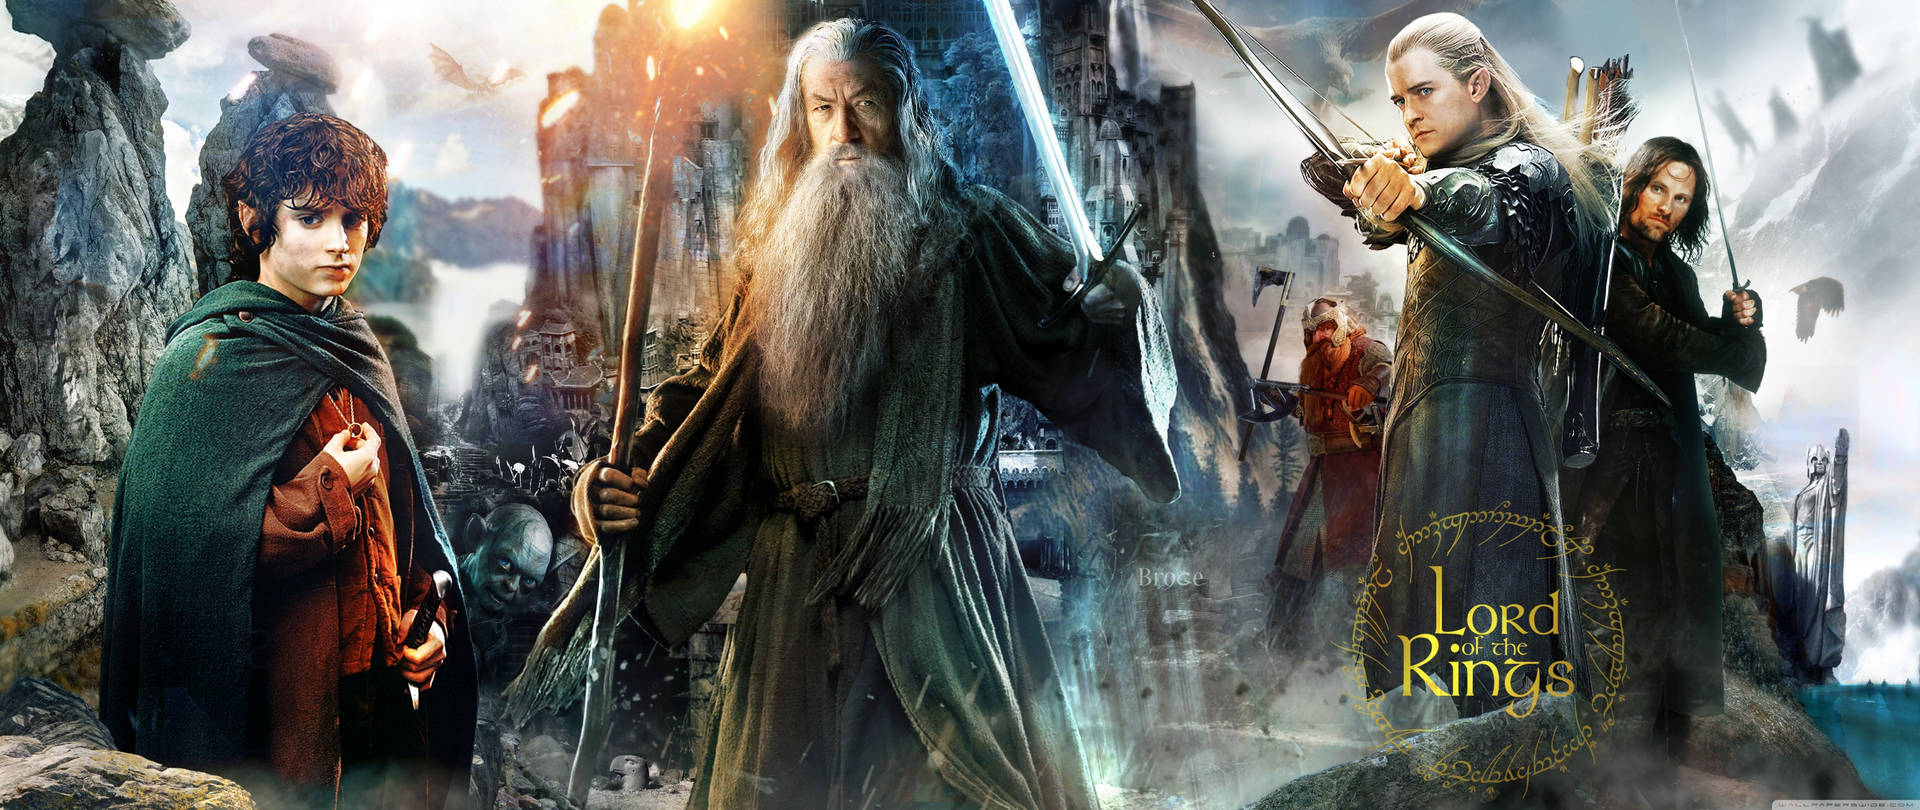 5120X2160 Lord Of The Rings Wallpaper and Background